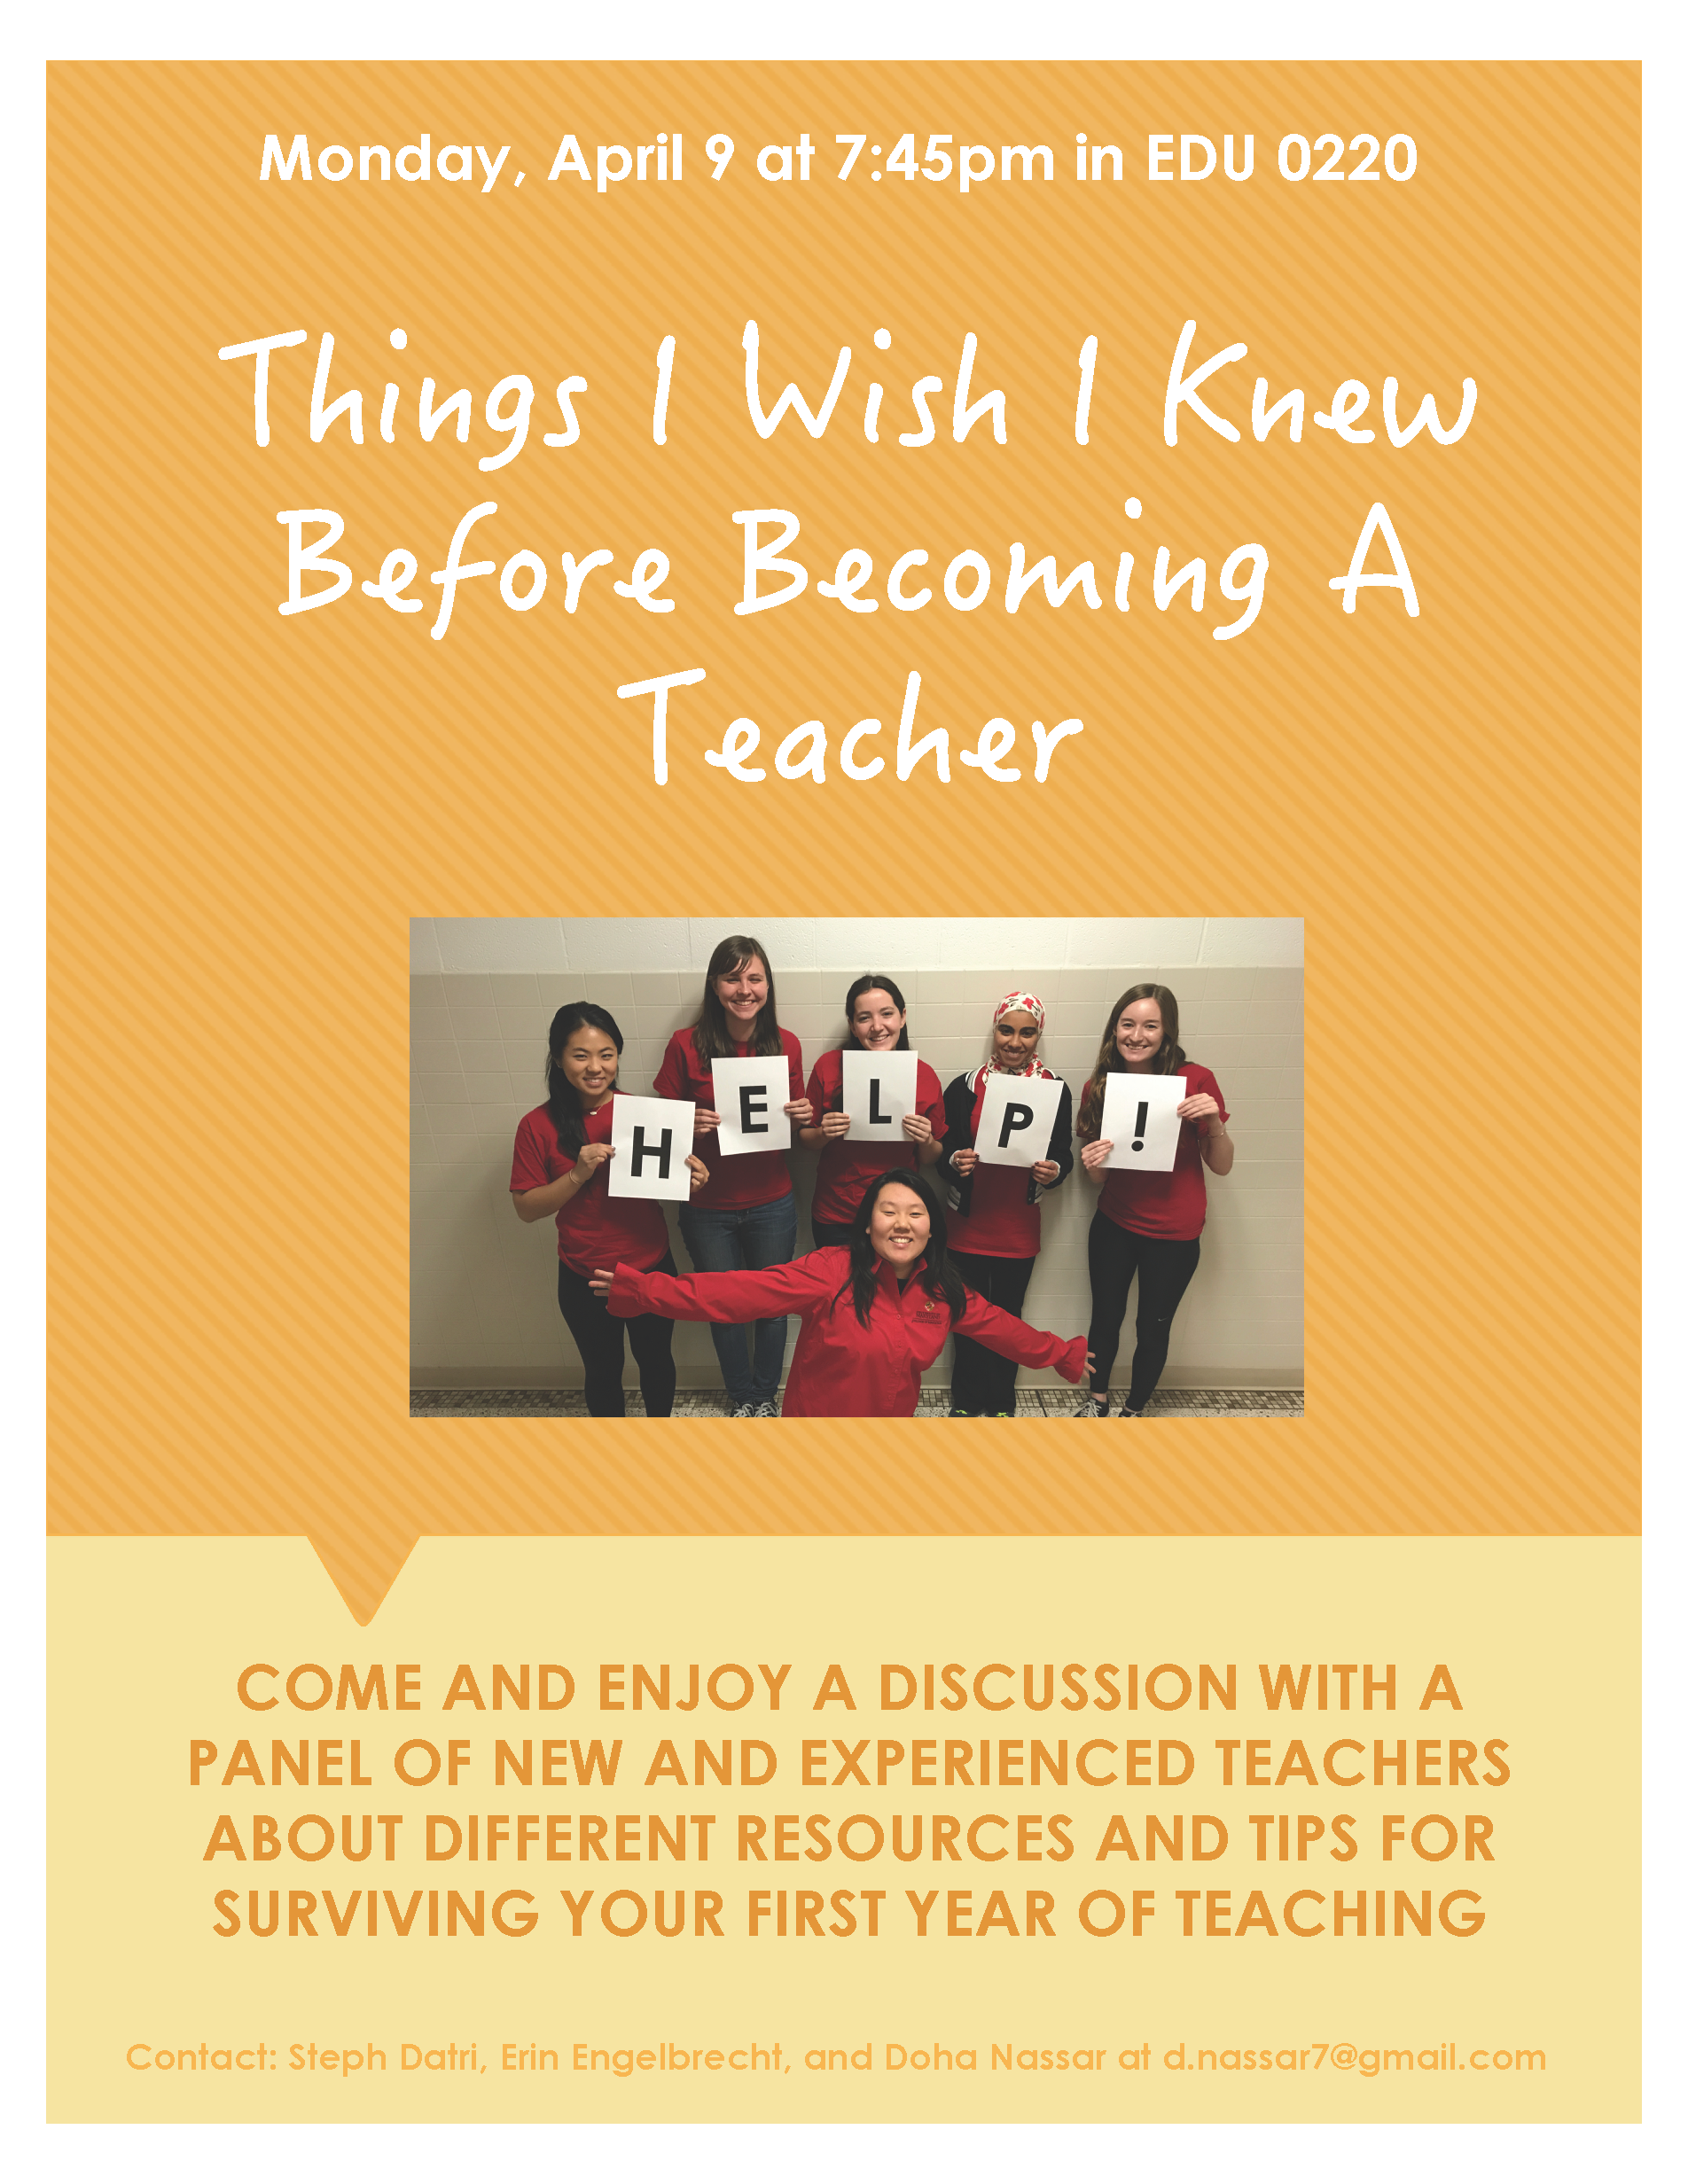 Things I Wish I Knew Before Becoming a Teacher